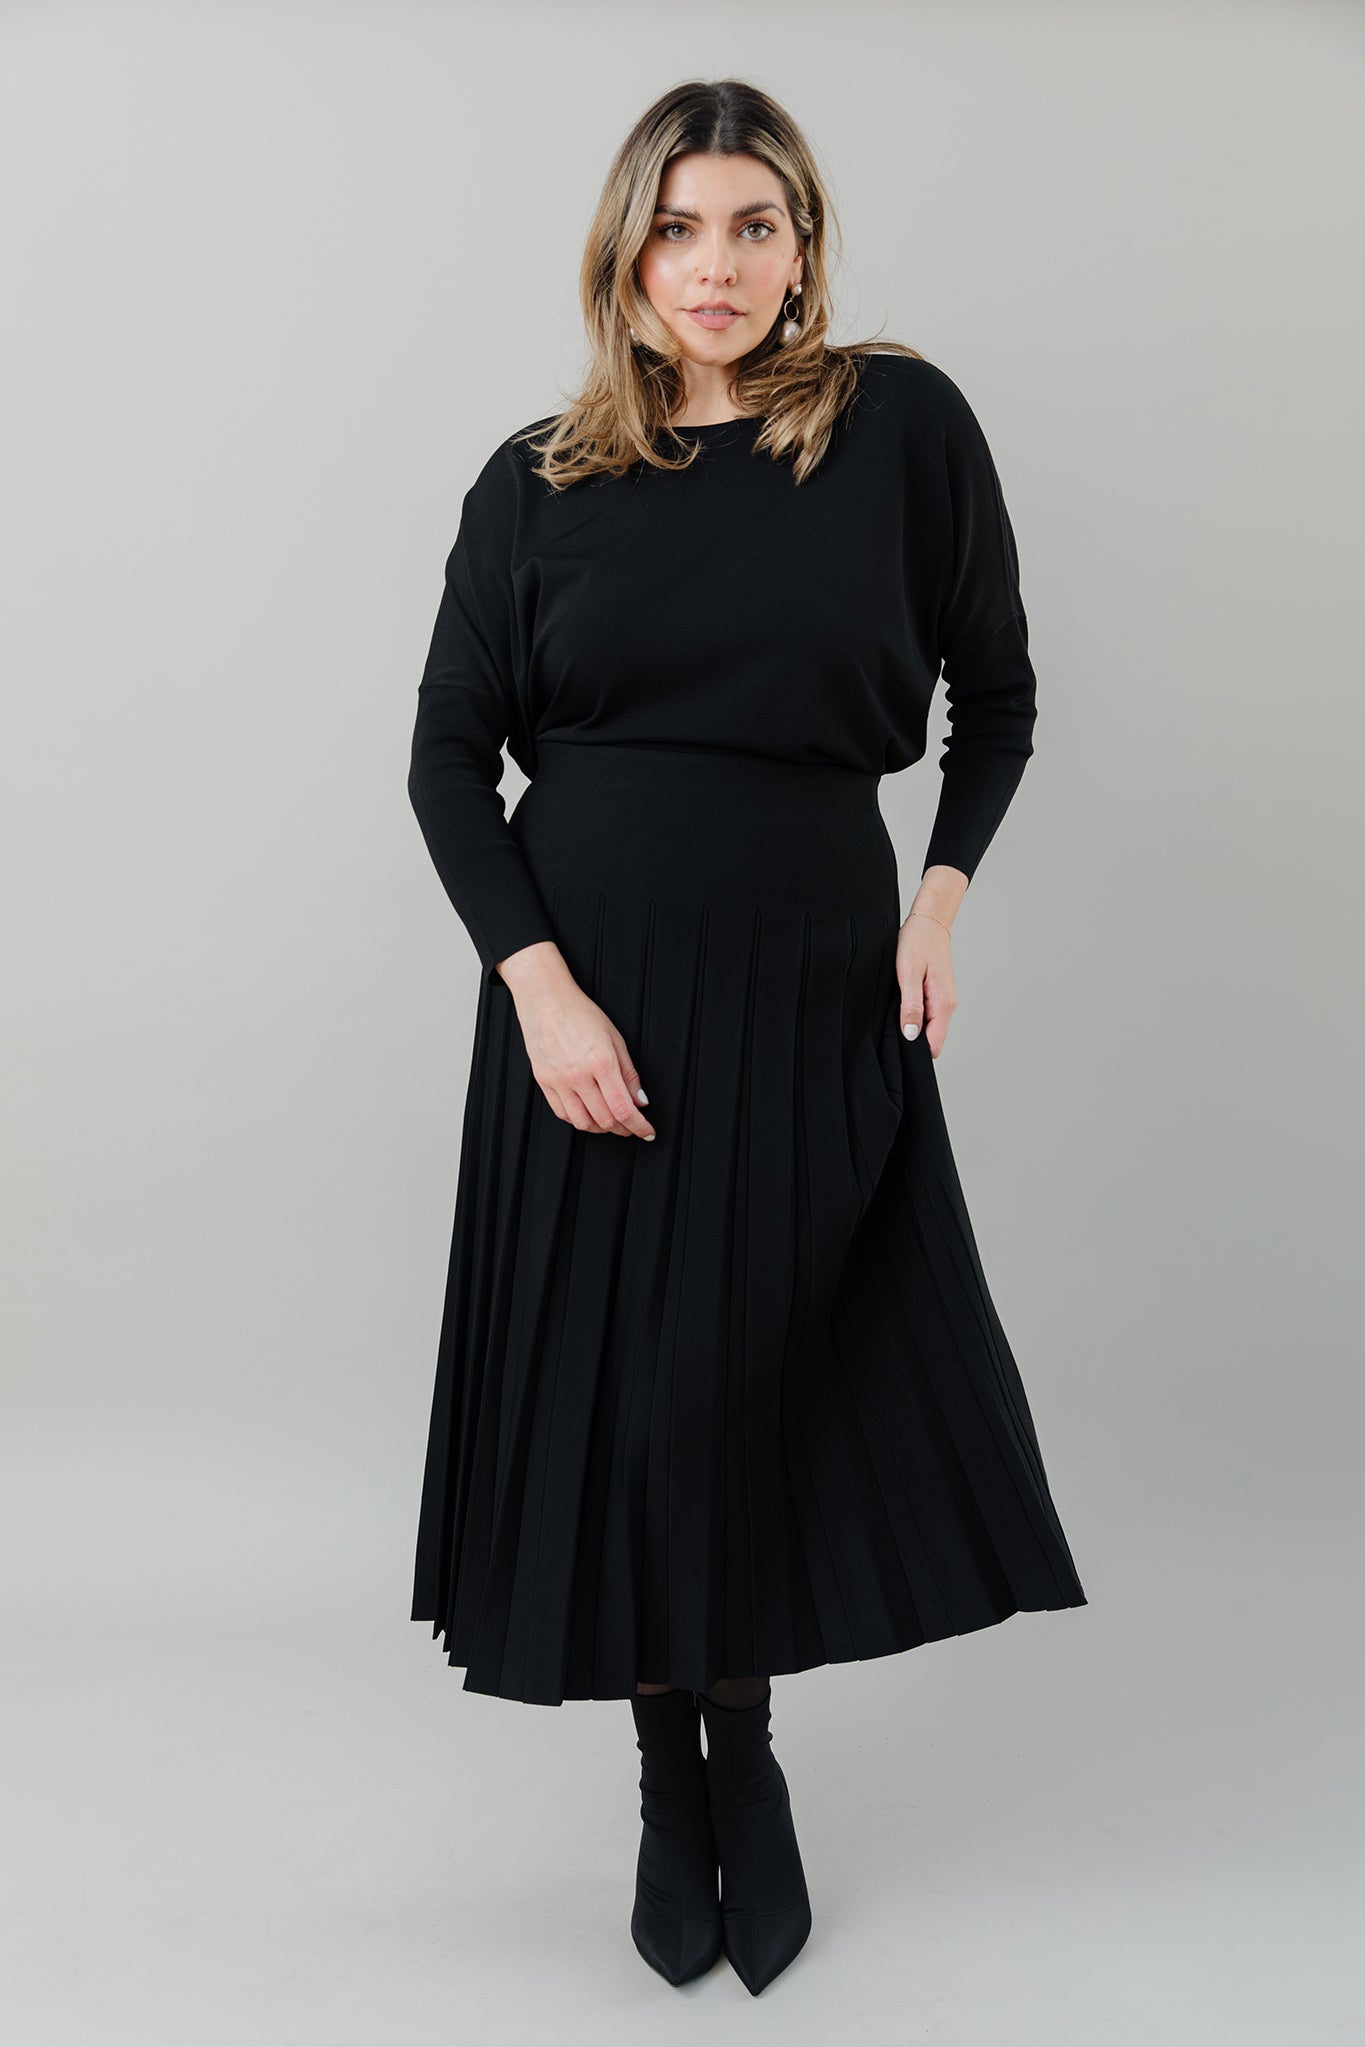 The Maxi Infinity Skirt in Black